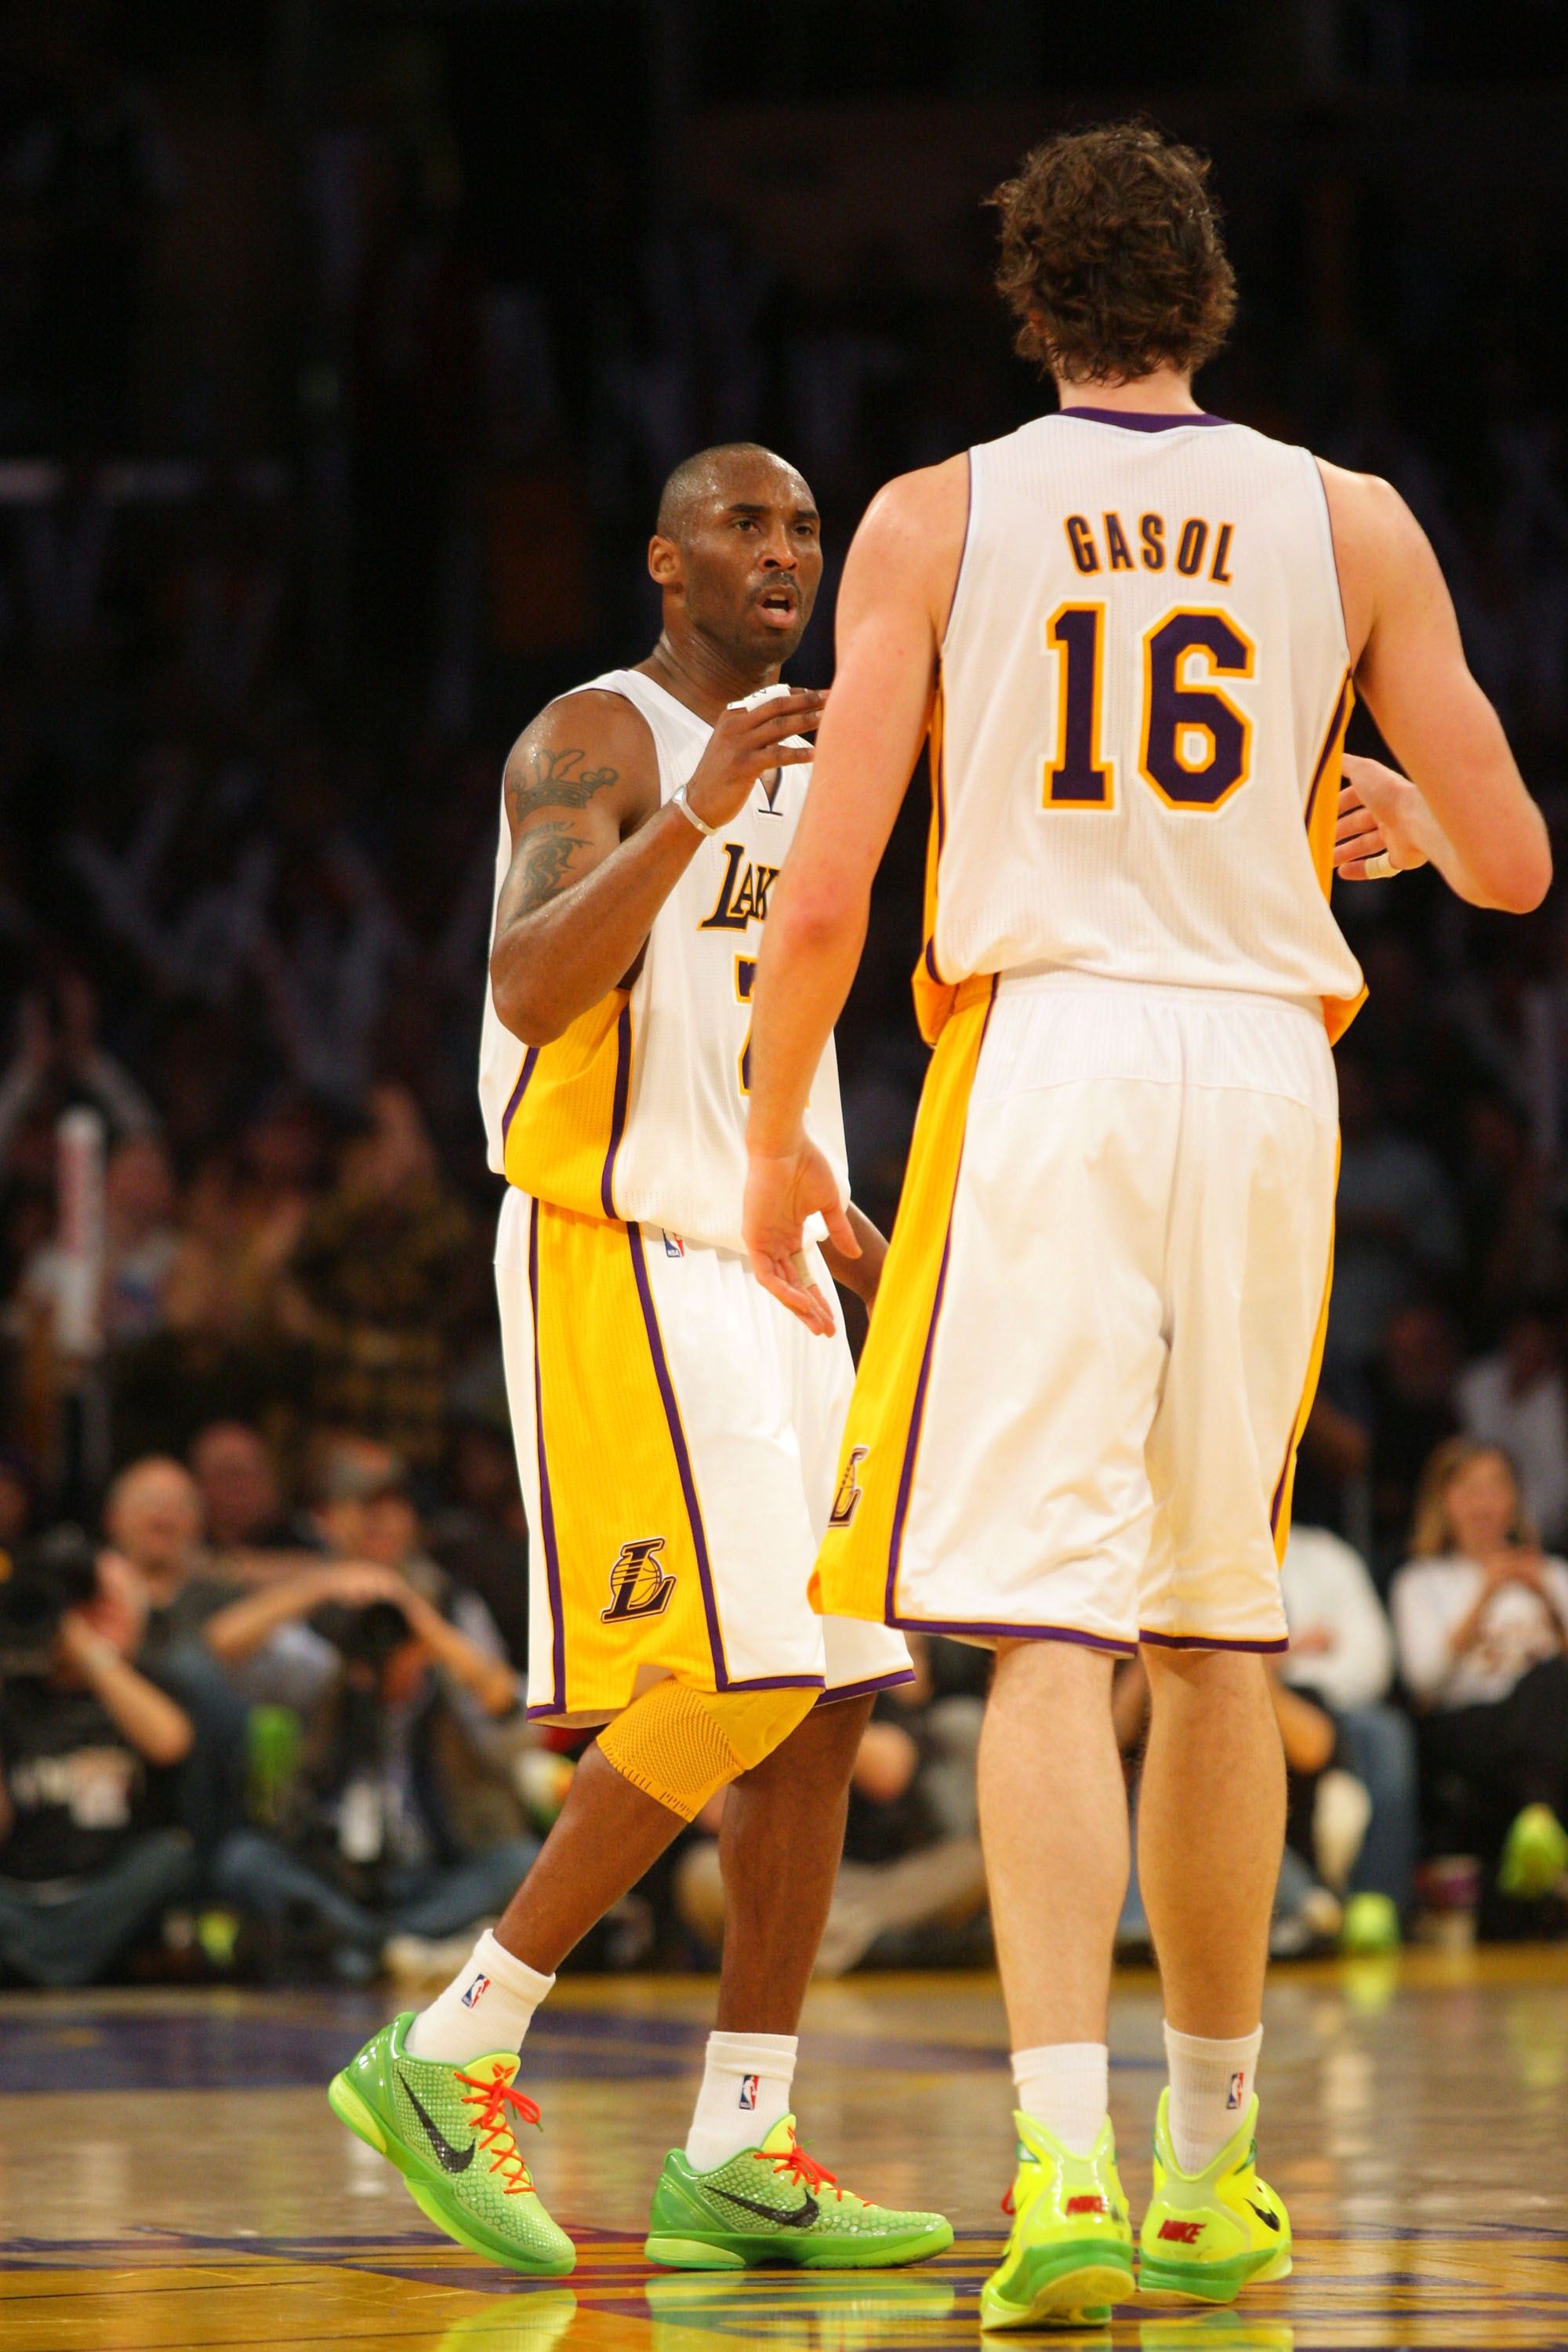 LOS ANGELES, CA - DECEMBER 25:  Kobe Bryant #24 of the Los Angeles Lakers and teammate Pau Gasol #16 celebrate after a play against the Miami Heat during the NBA game at Staples Center on December 25, 2010 in Los Angeles, California. The Heat defeated the